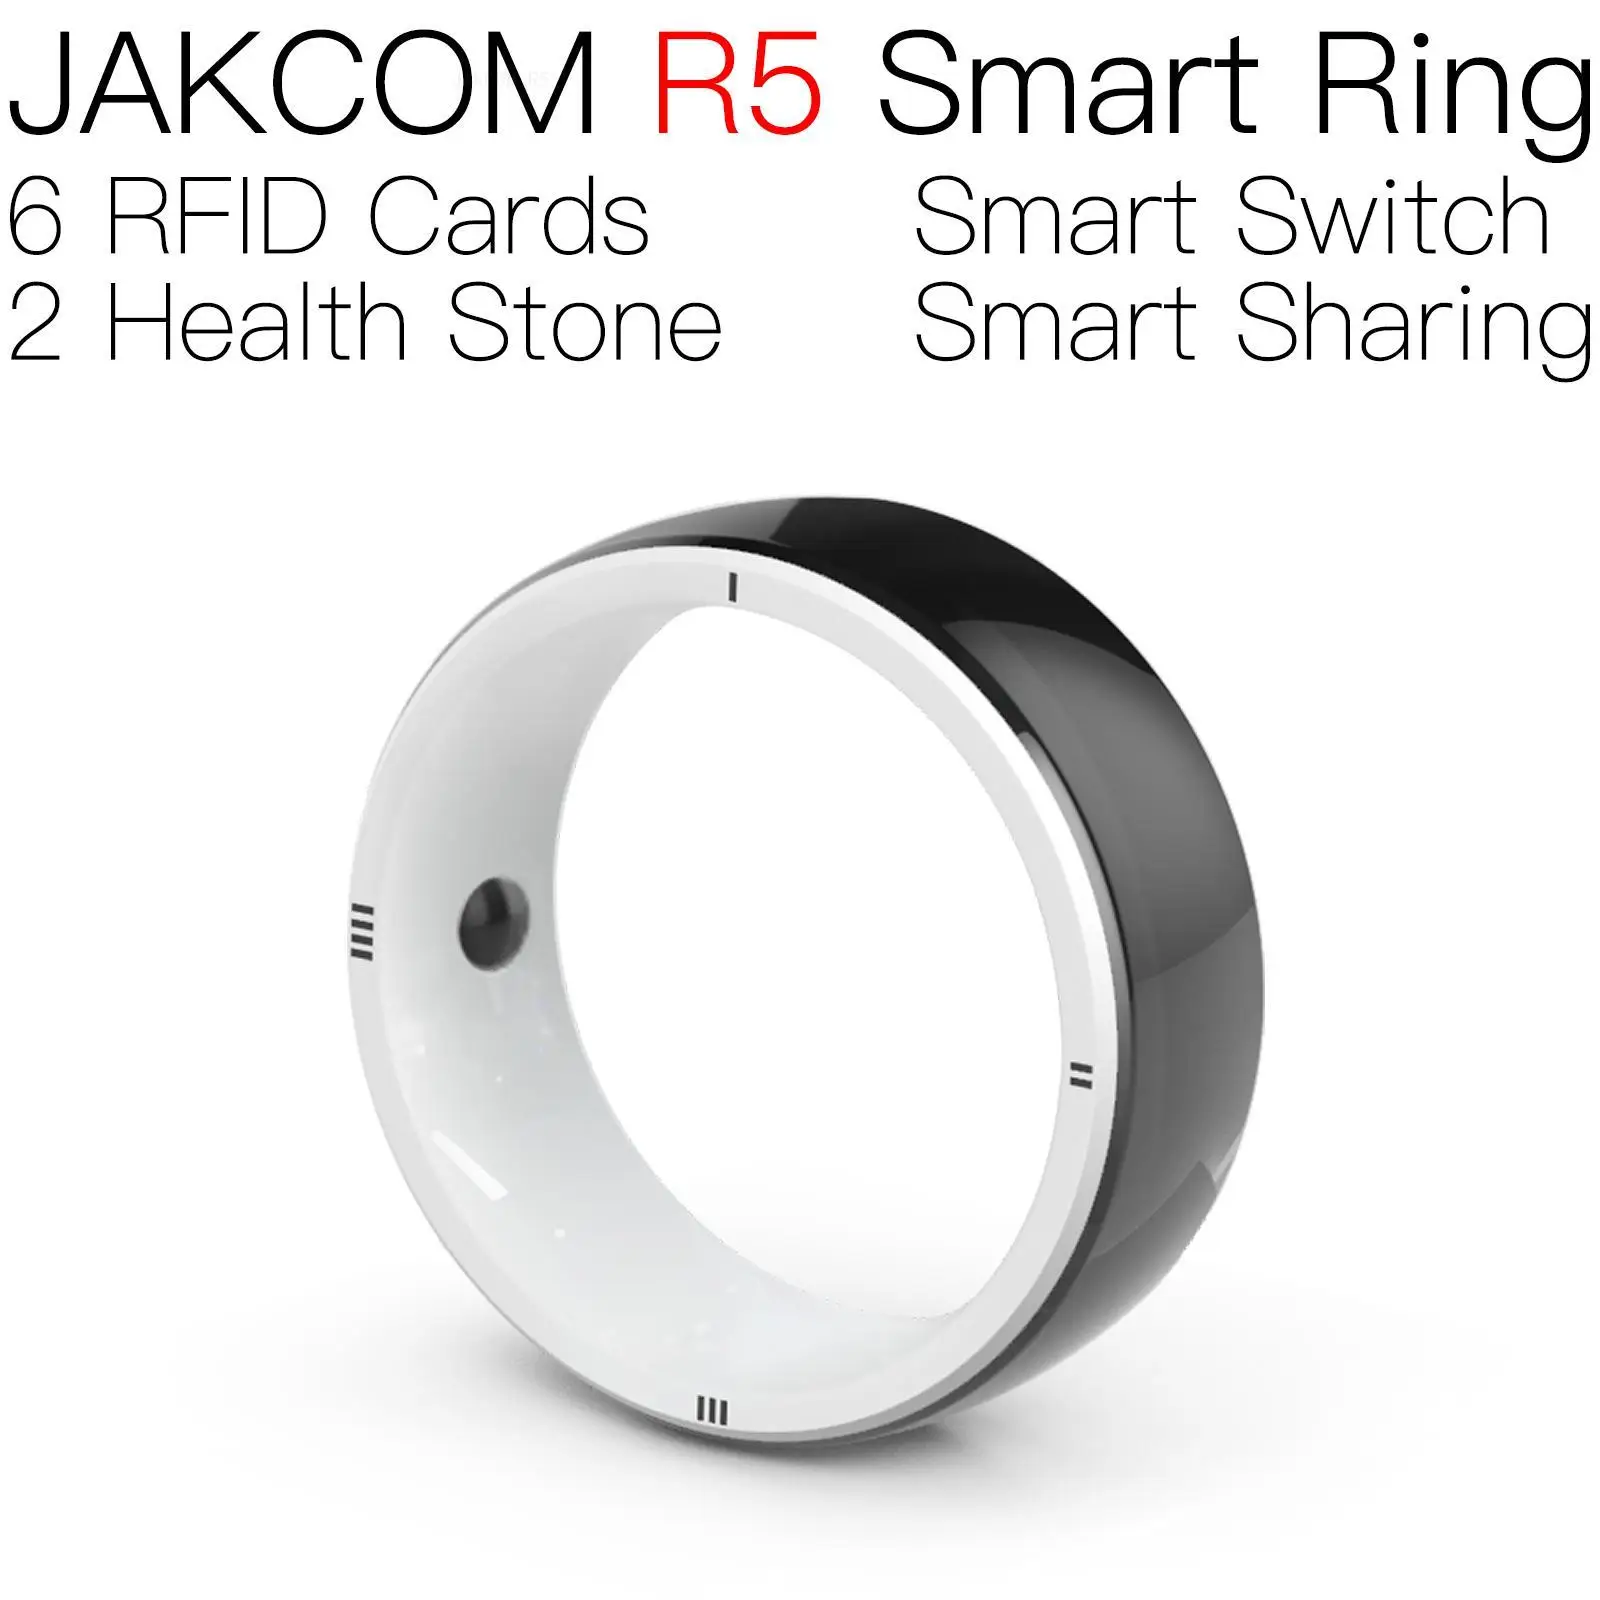 

JAKCOM R5 Smart Ring New product as rfid card mhz reader id printable nfc ceramic patch antenna 915 920 923 uhf portable